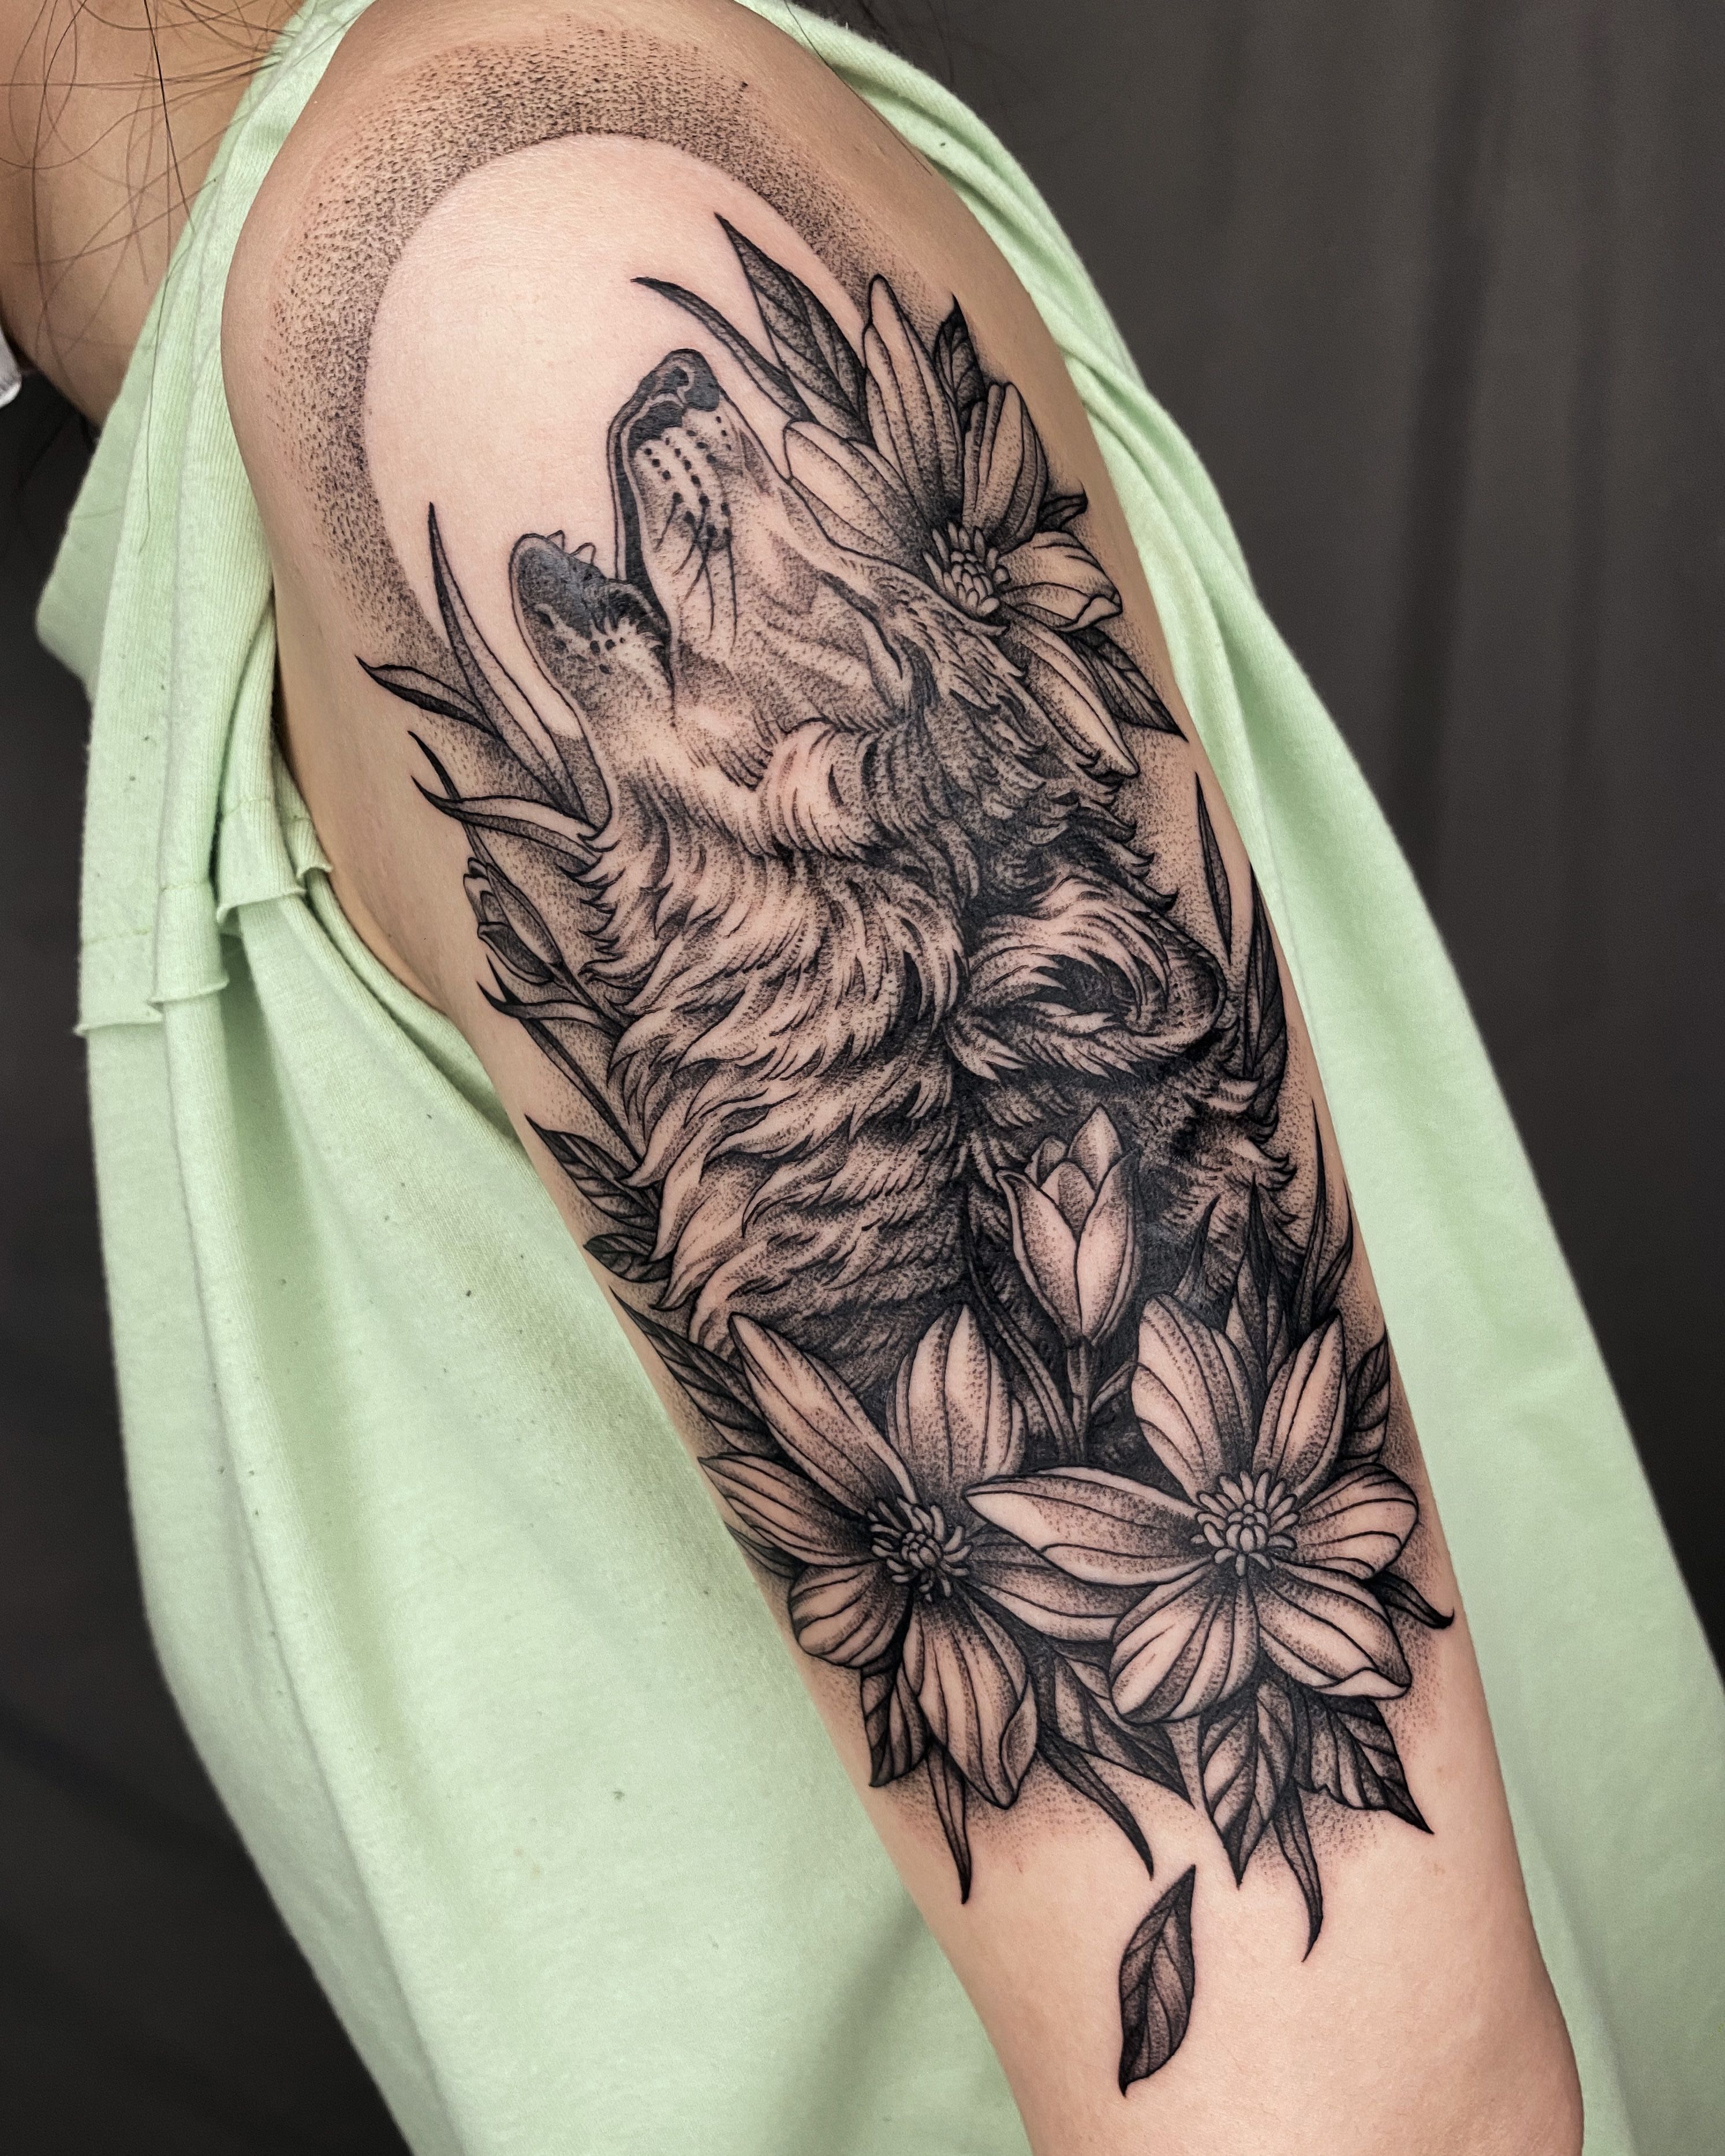 Angry wolf flower tattoo Anemones Black and grey Do not copy the design   Tattoos for women half sleeve Wolf tattoos for women Wolf tattoo